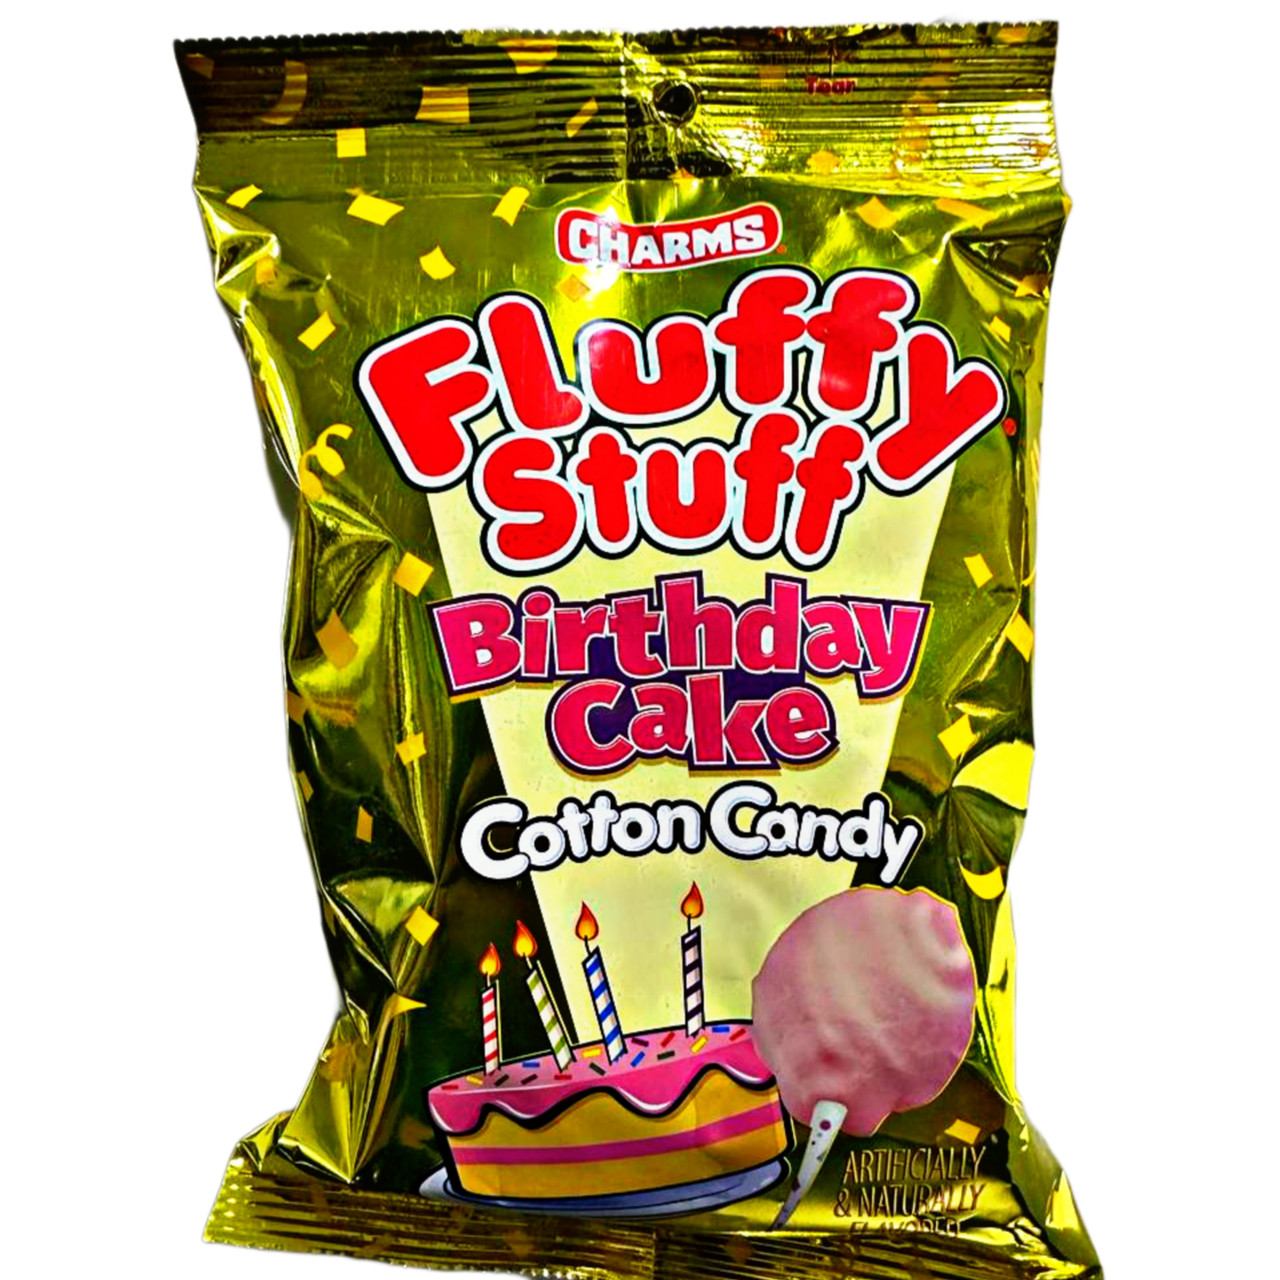 Charms Fluffy Stuff Birthday Cake Cotton Candy